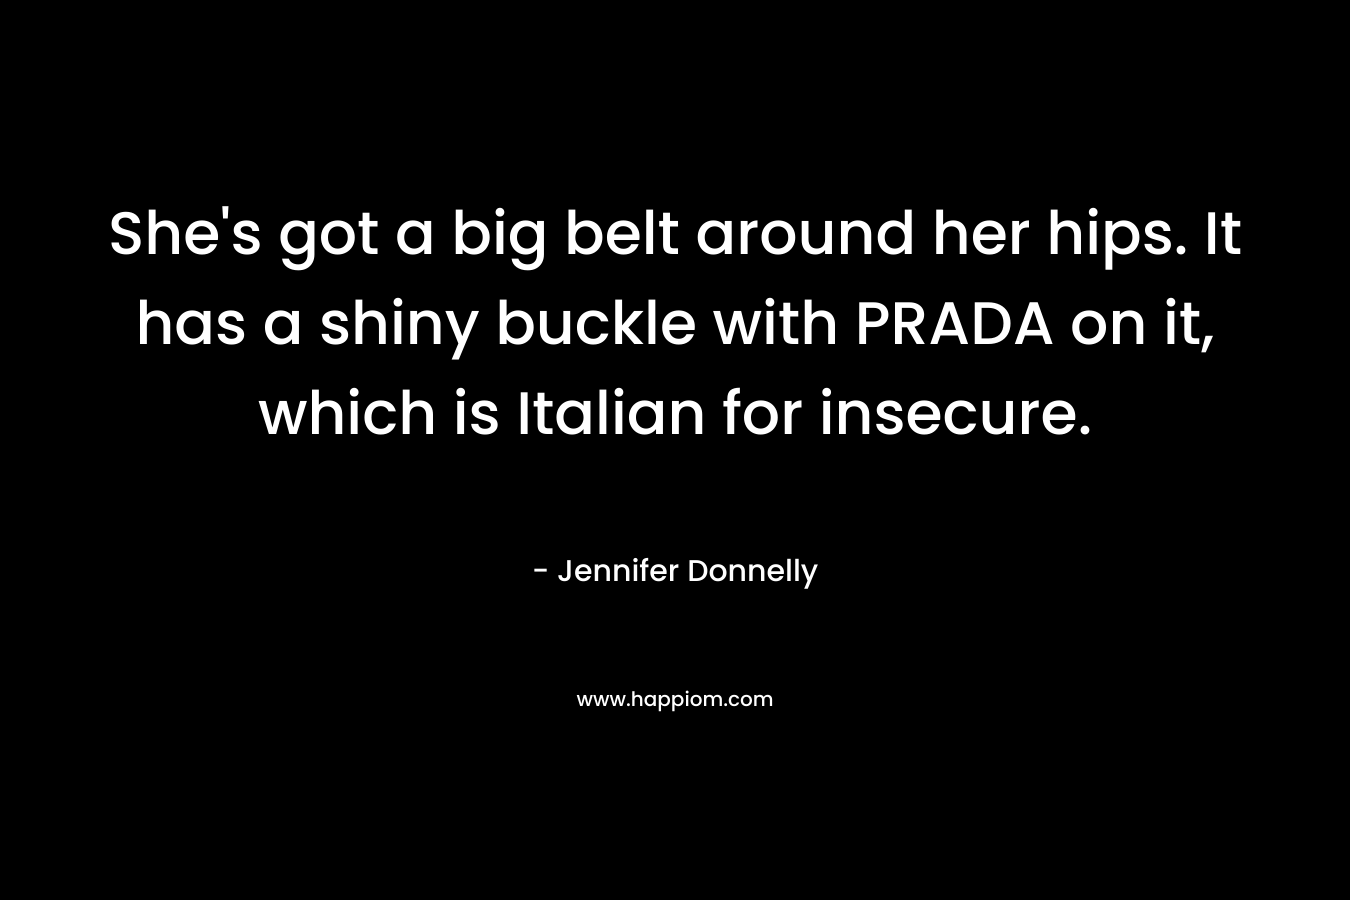 She’s got a big belt around her hips. It has a shiny buckle with PRADA on it, which is Italian for insecure. – Jennifer Donnelly